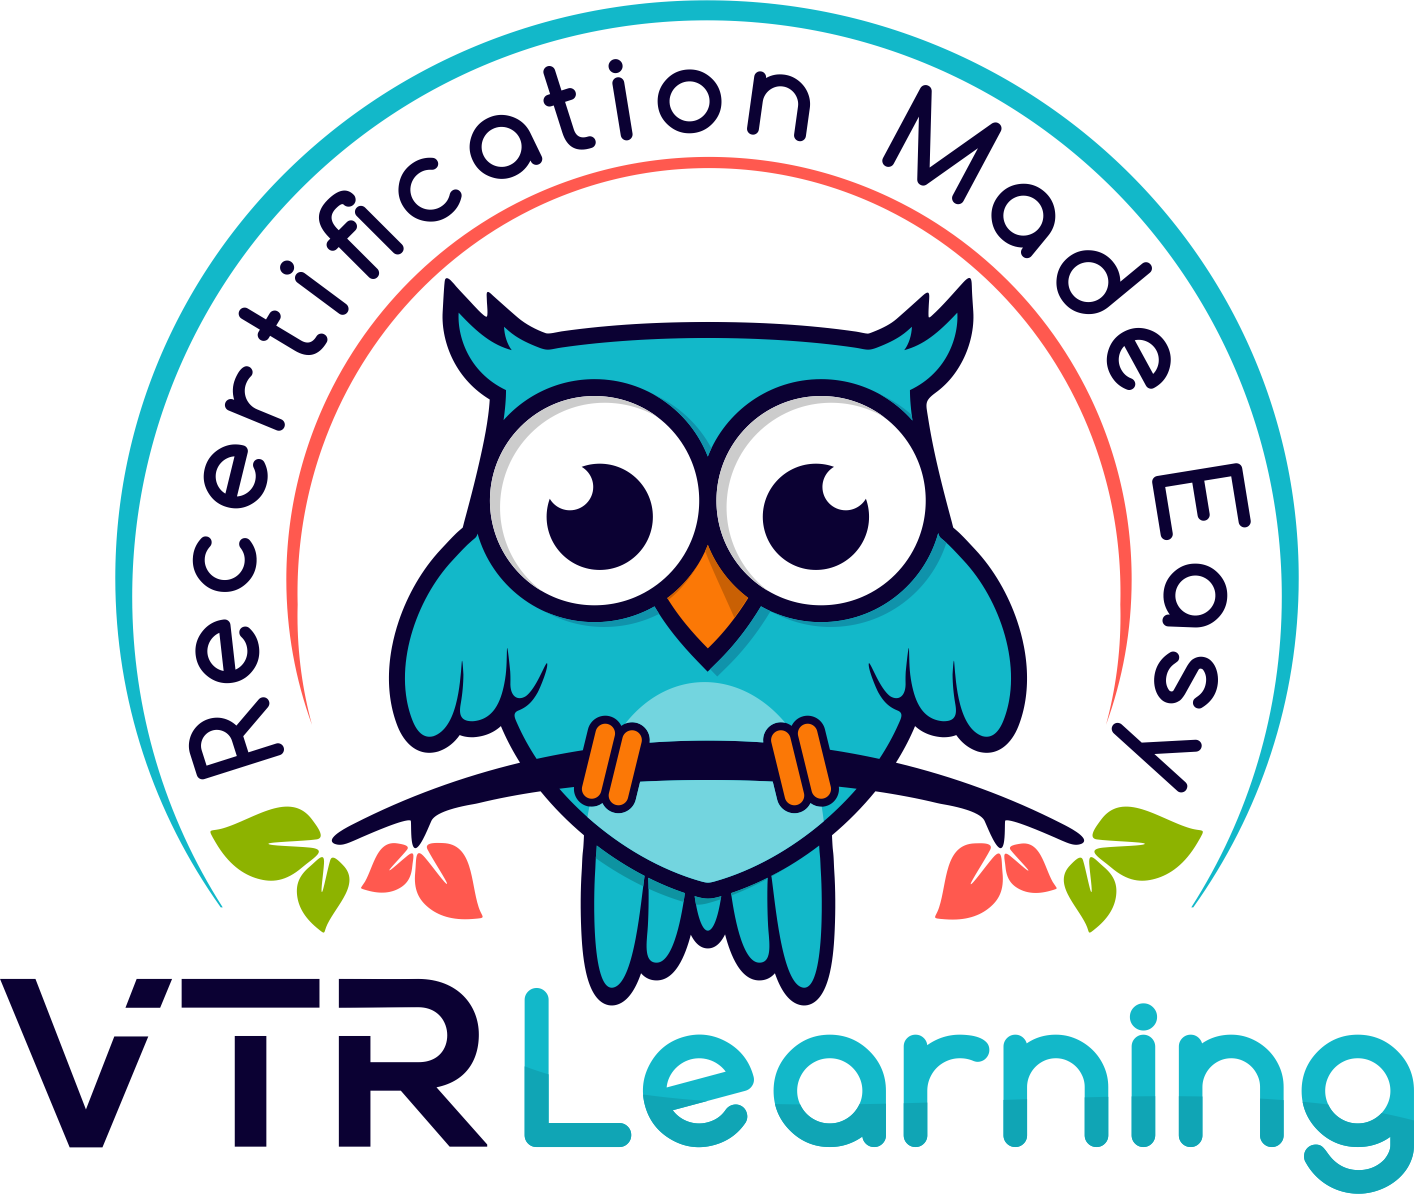 VTR Learning Logo with tagline "Recertification Made Easy"